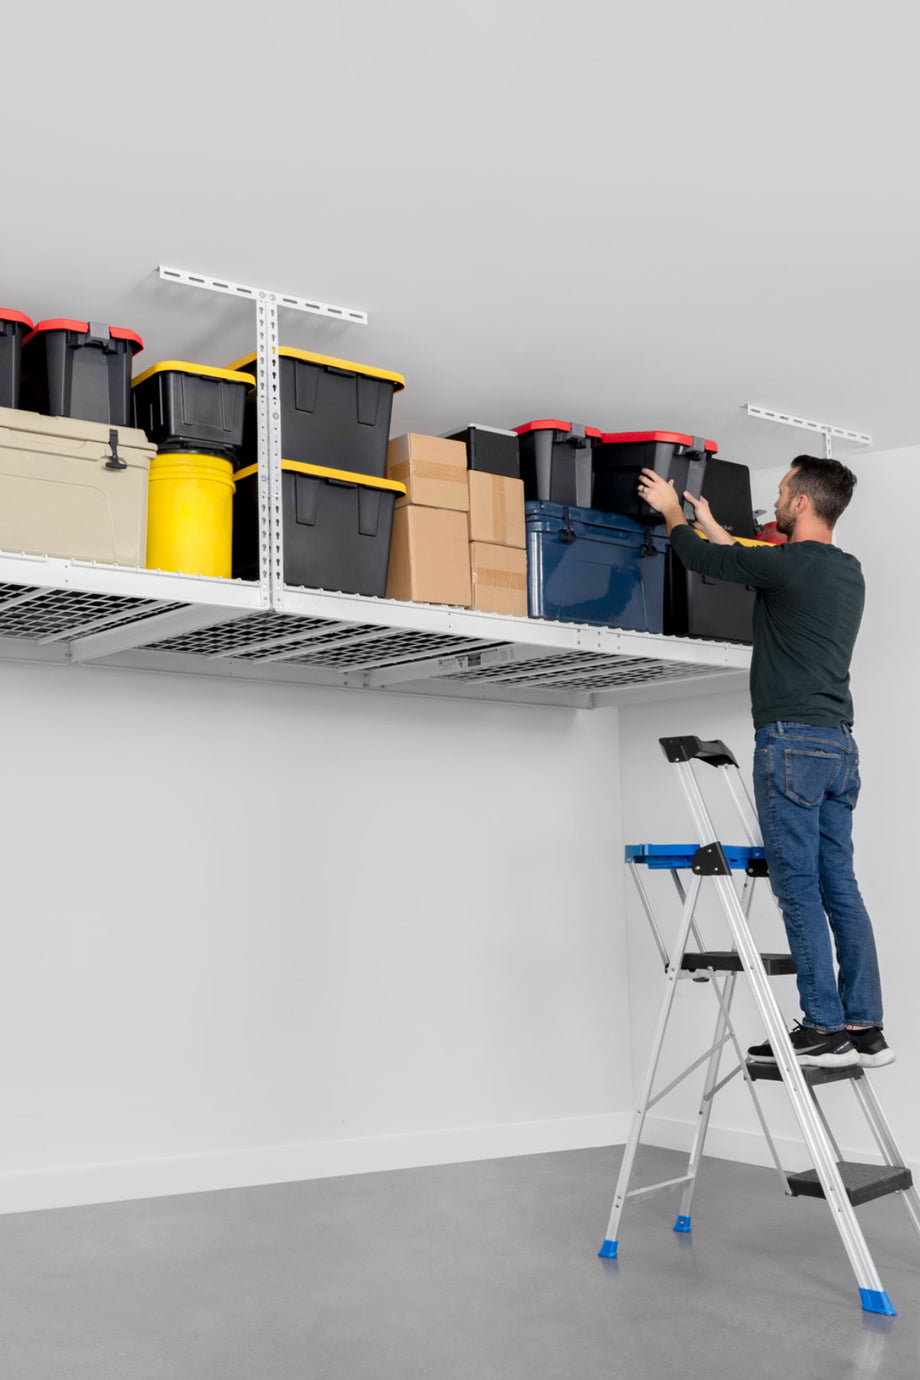 SafeRacks - Optimize Your Space with Overhead Garage Storage Solutions